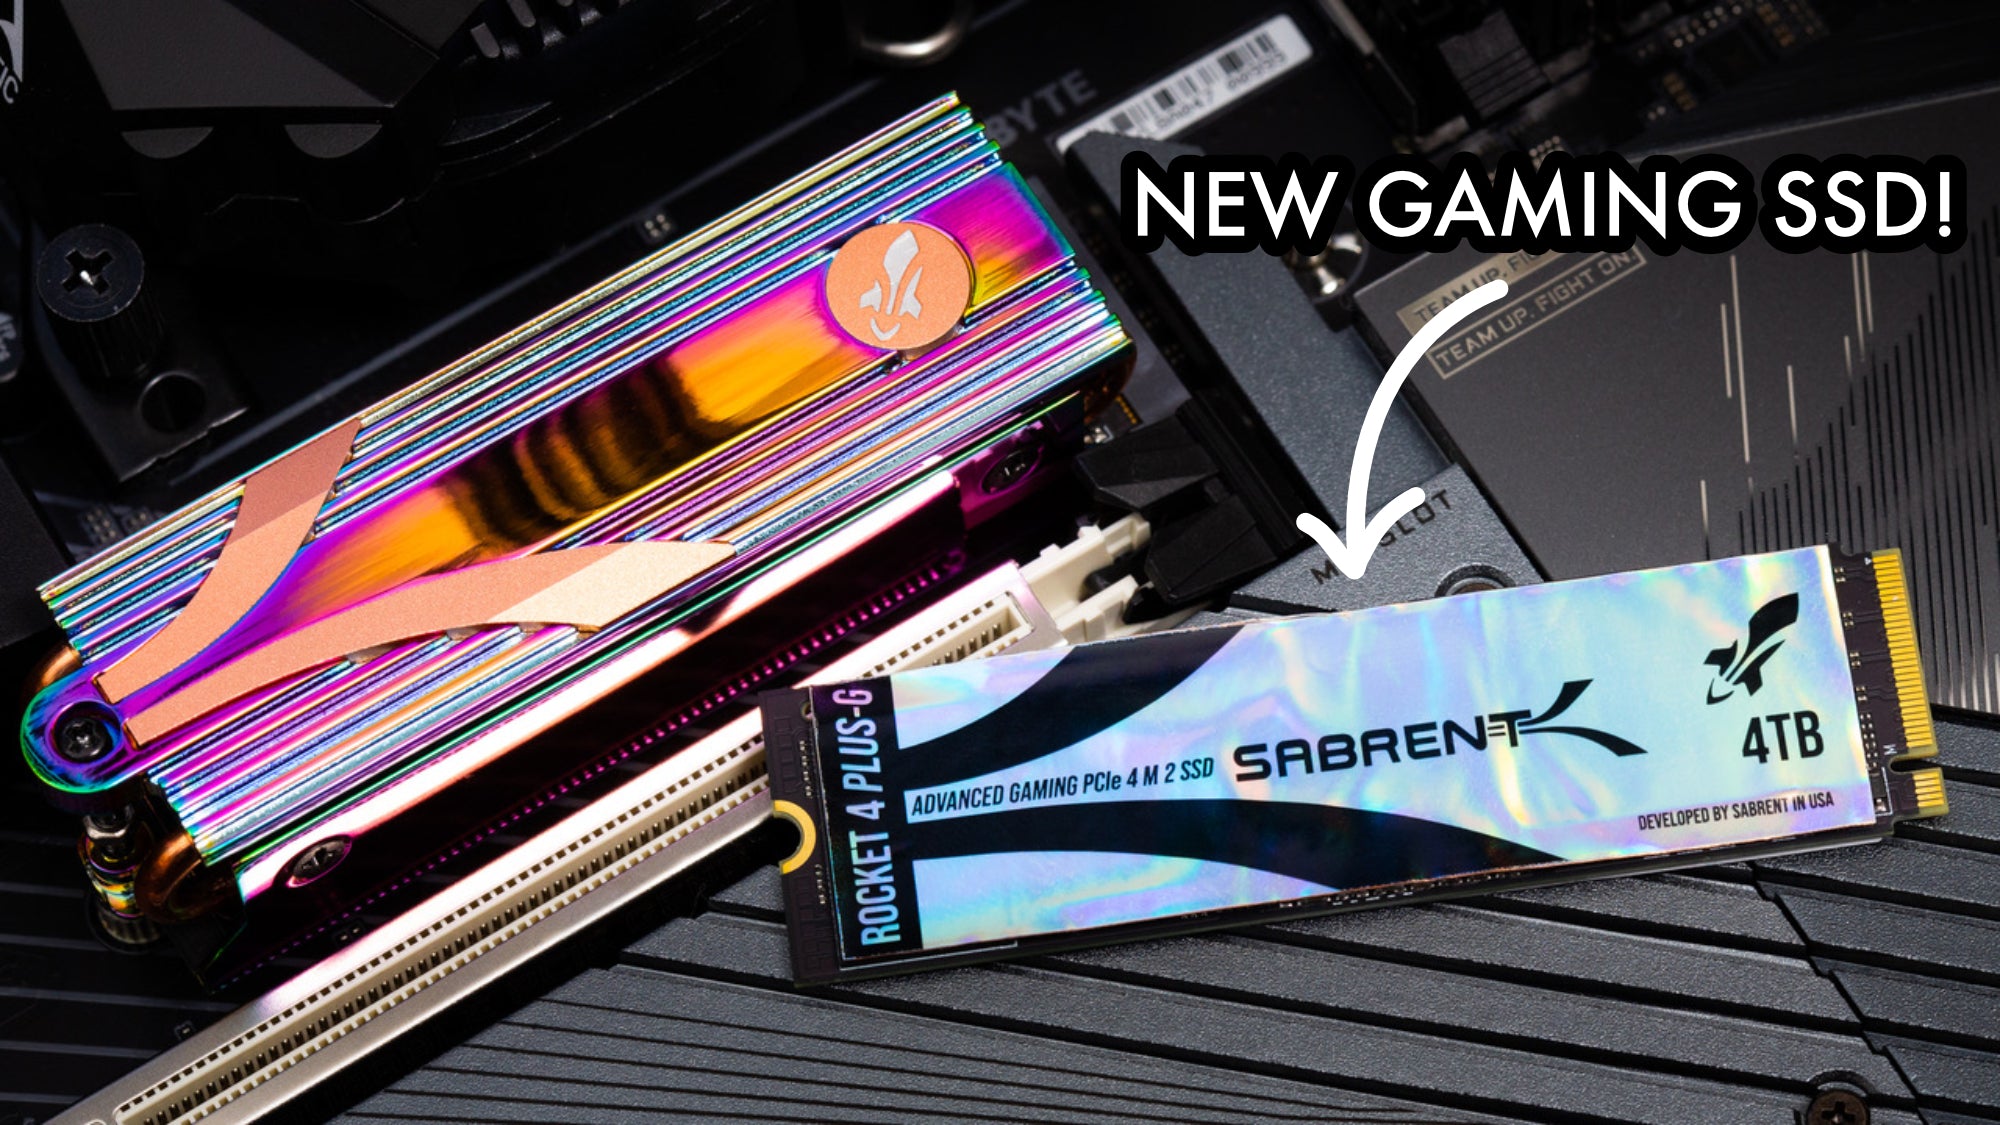 Rocket 4 Plus G | Future SSD For Gaming Now!